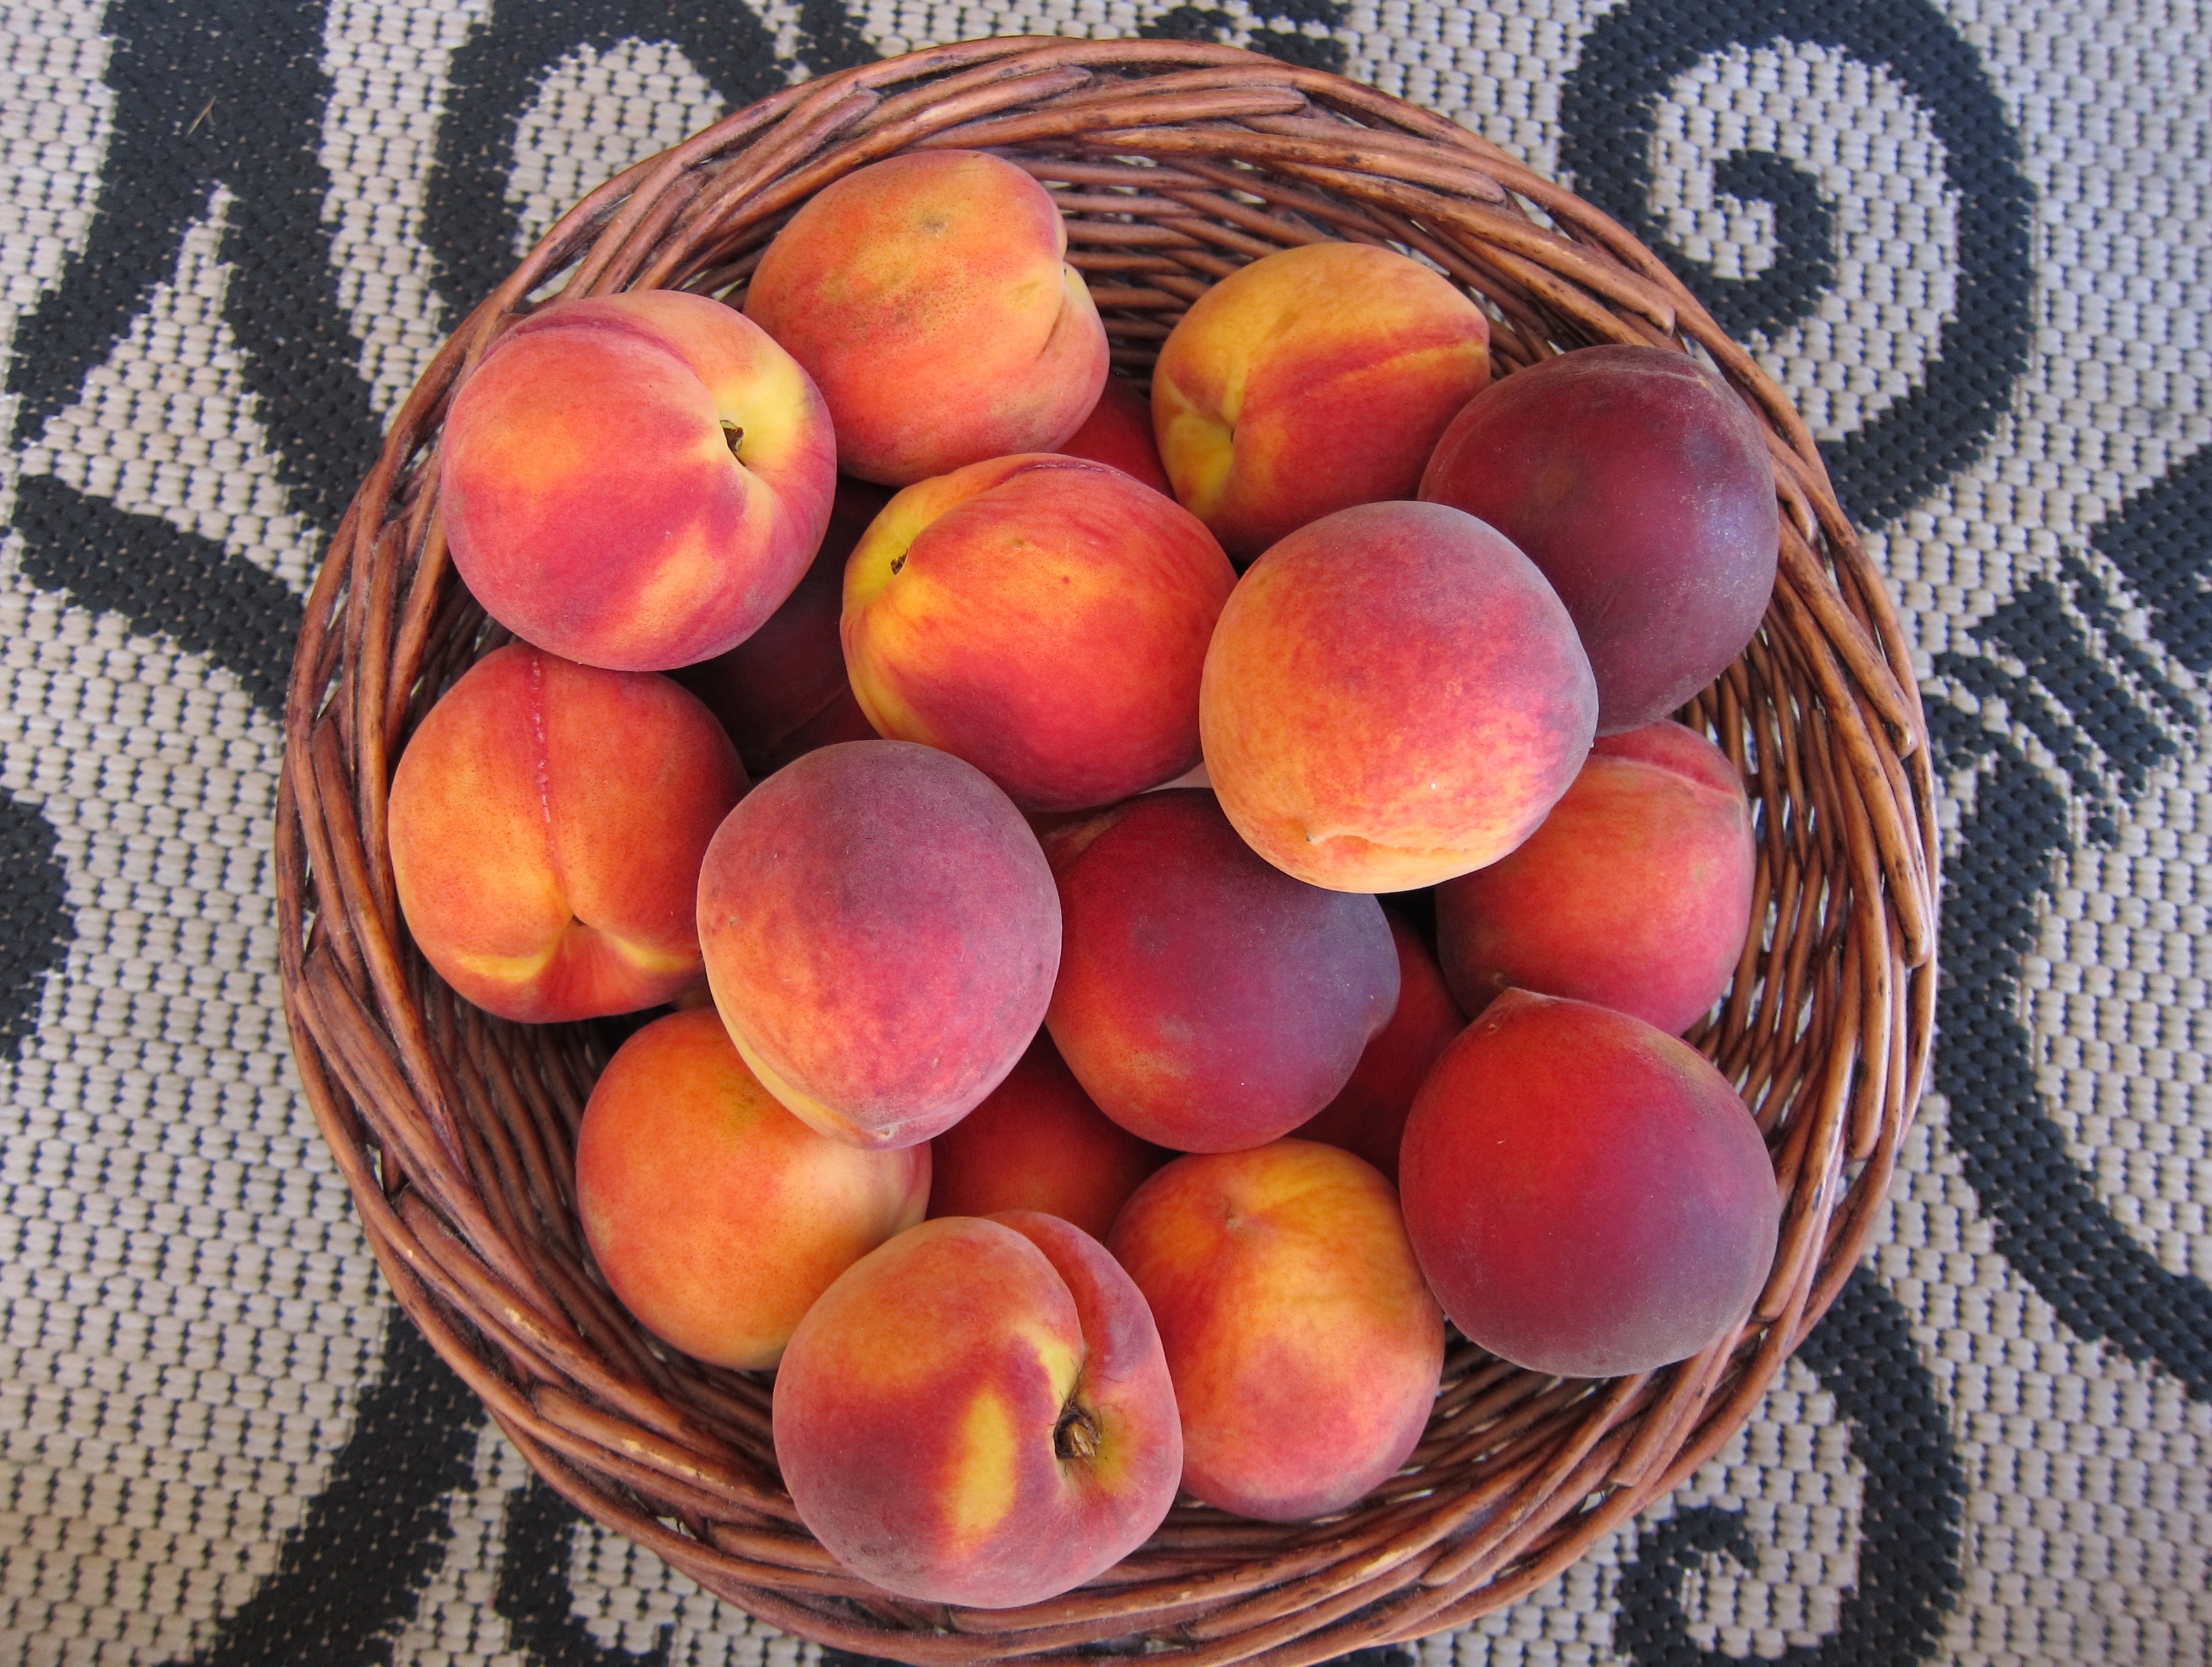 Texas Oven Co Tree Ripened Peaches This Summer